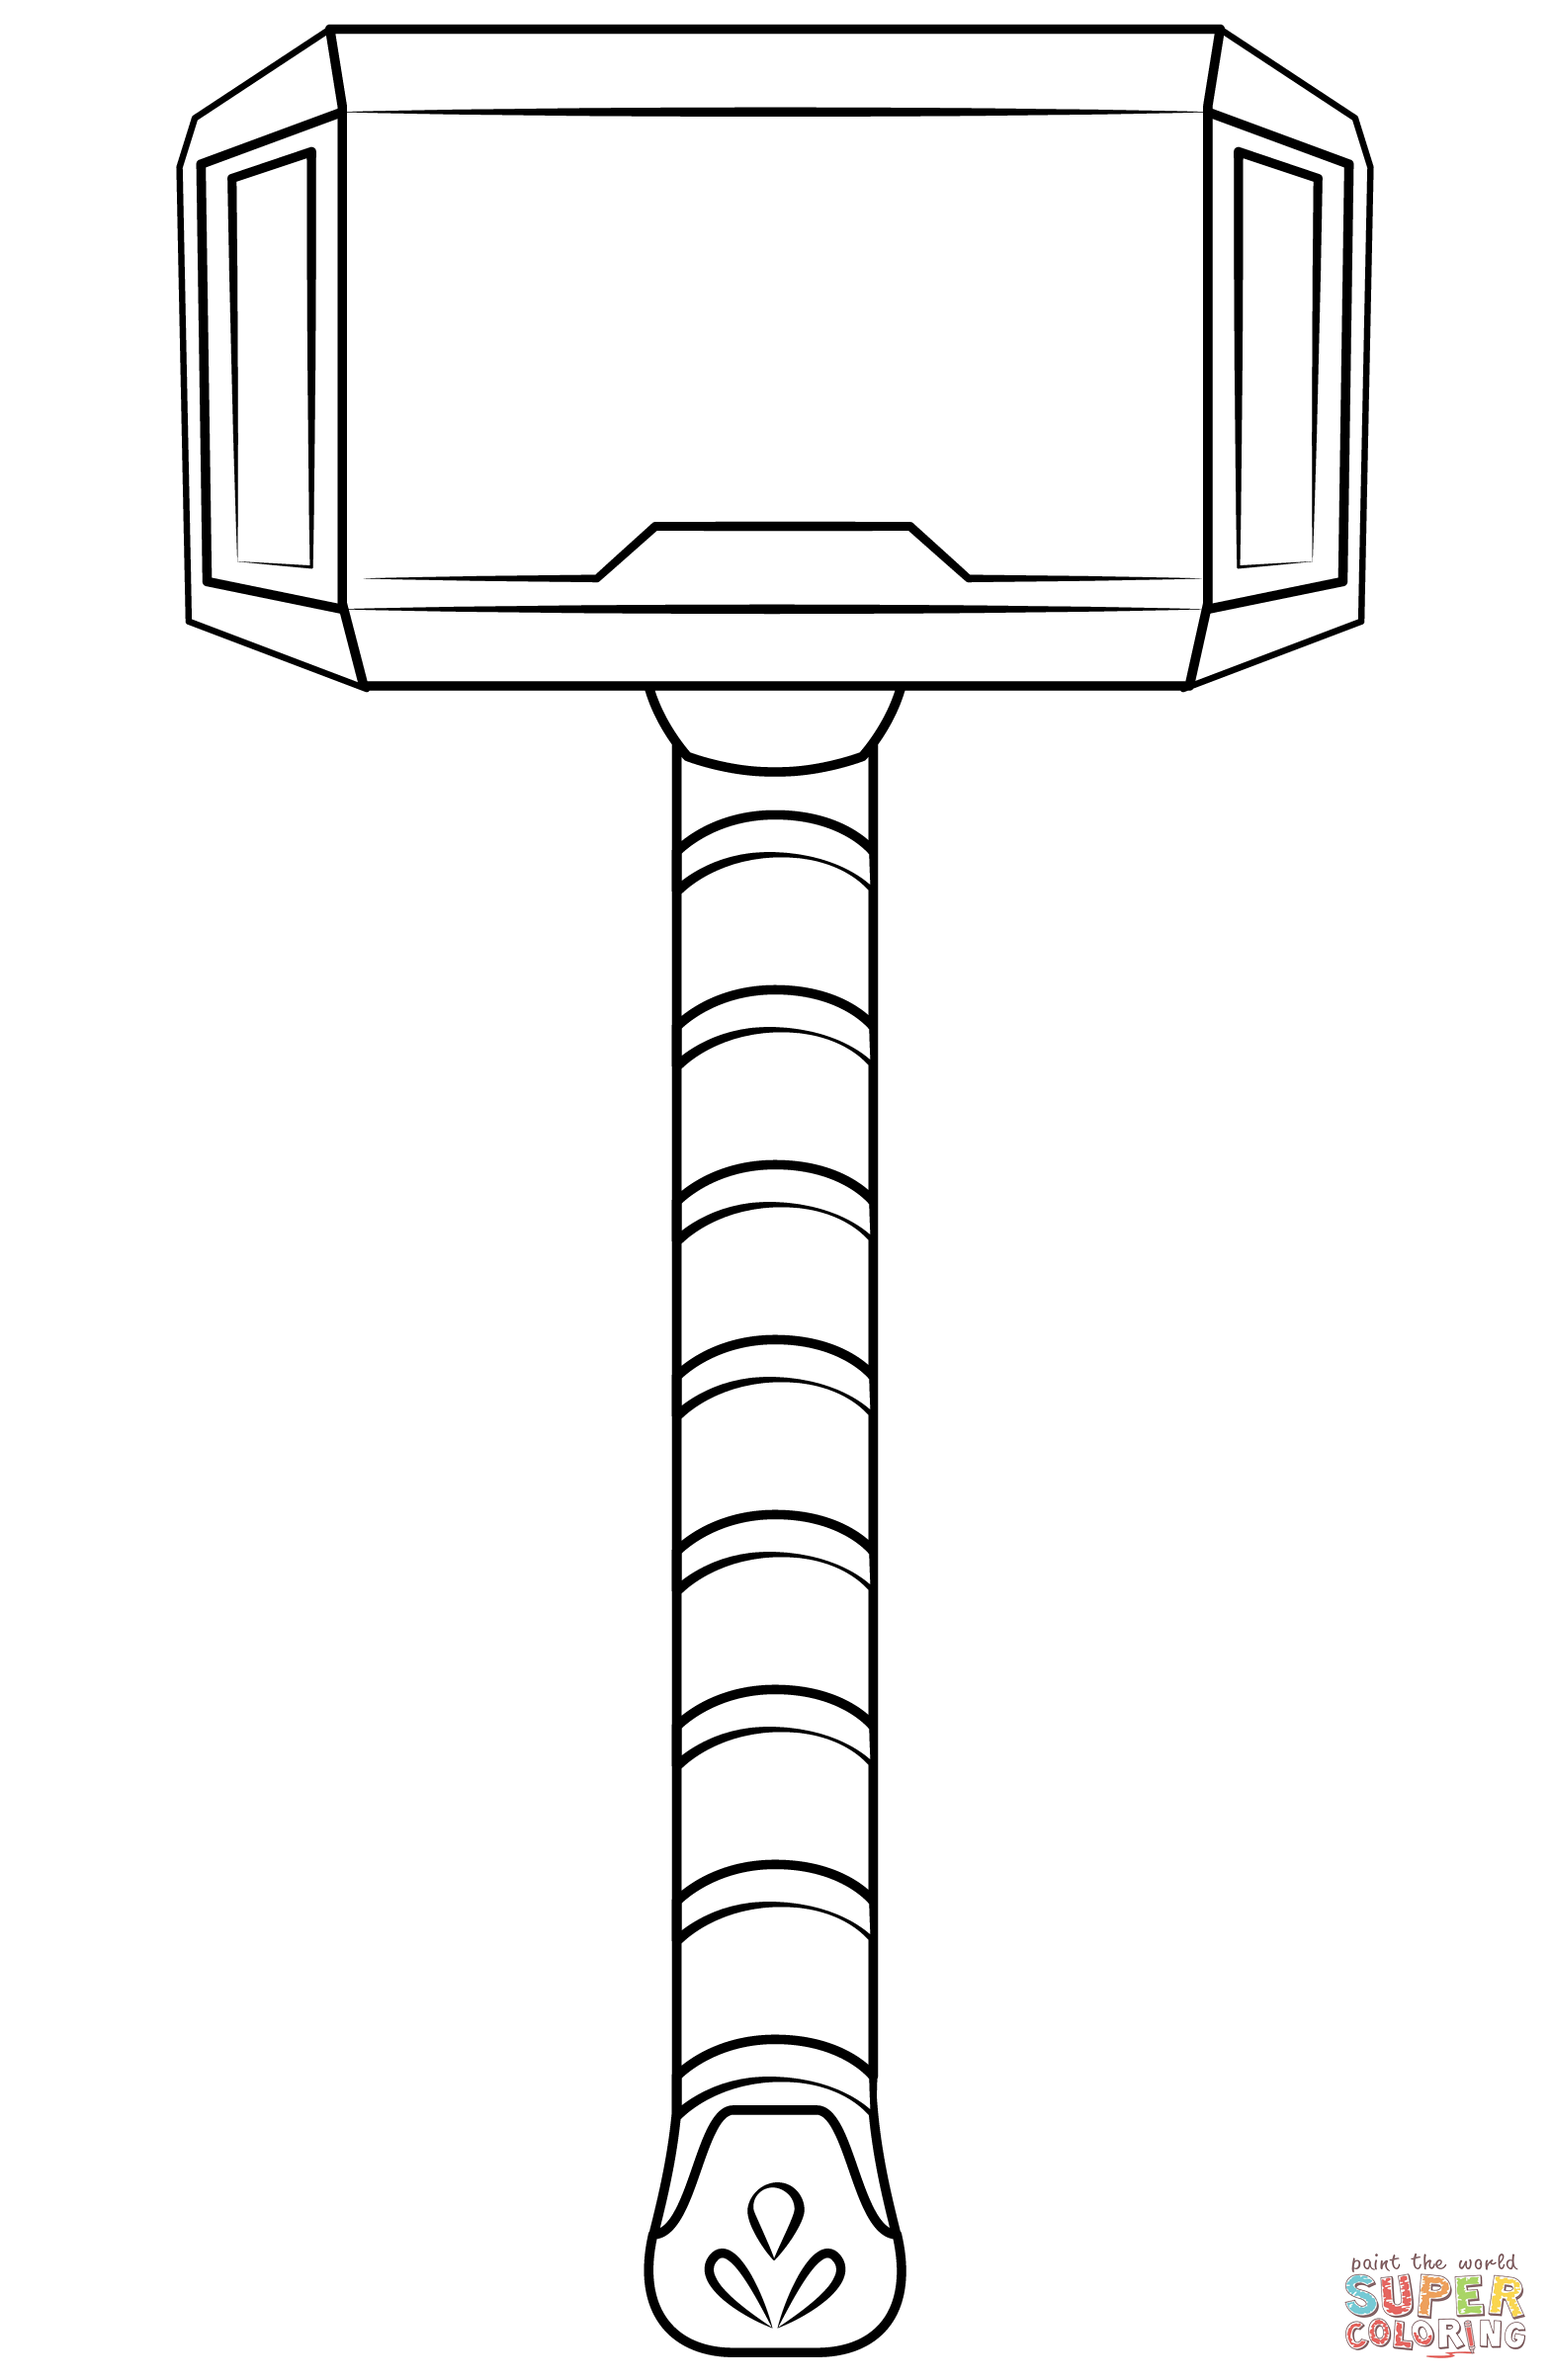 Thor hammer coloring page free printable coloring pages